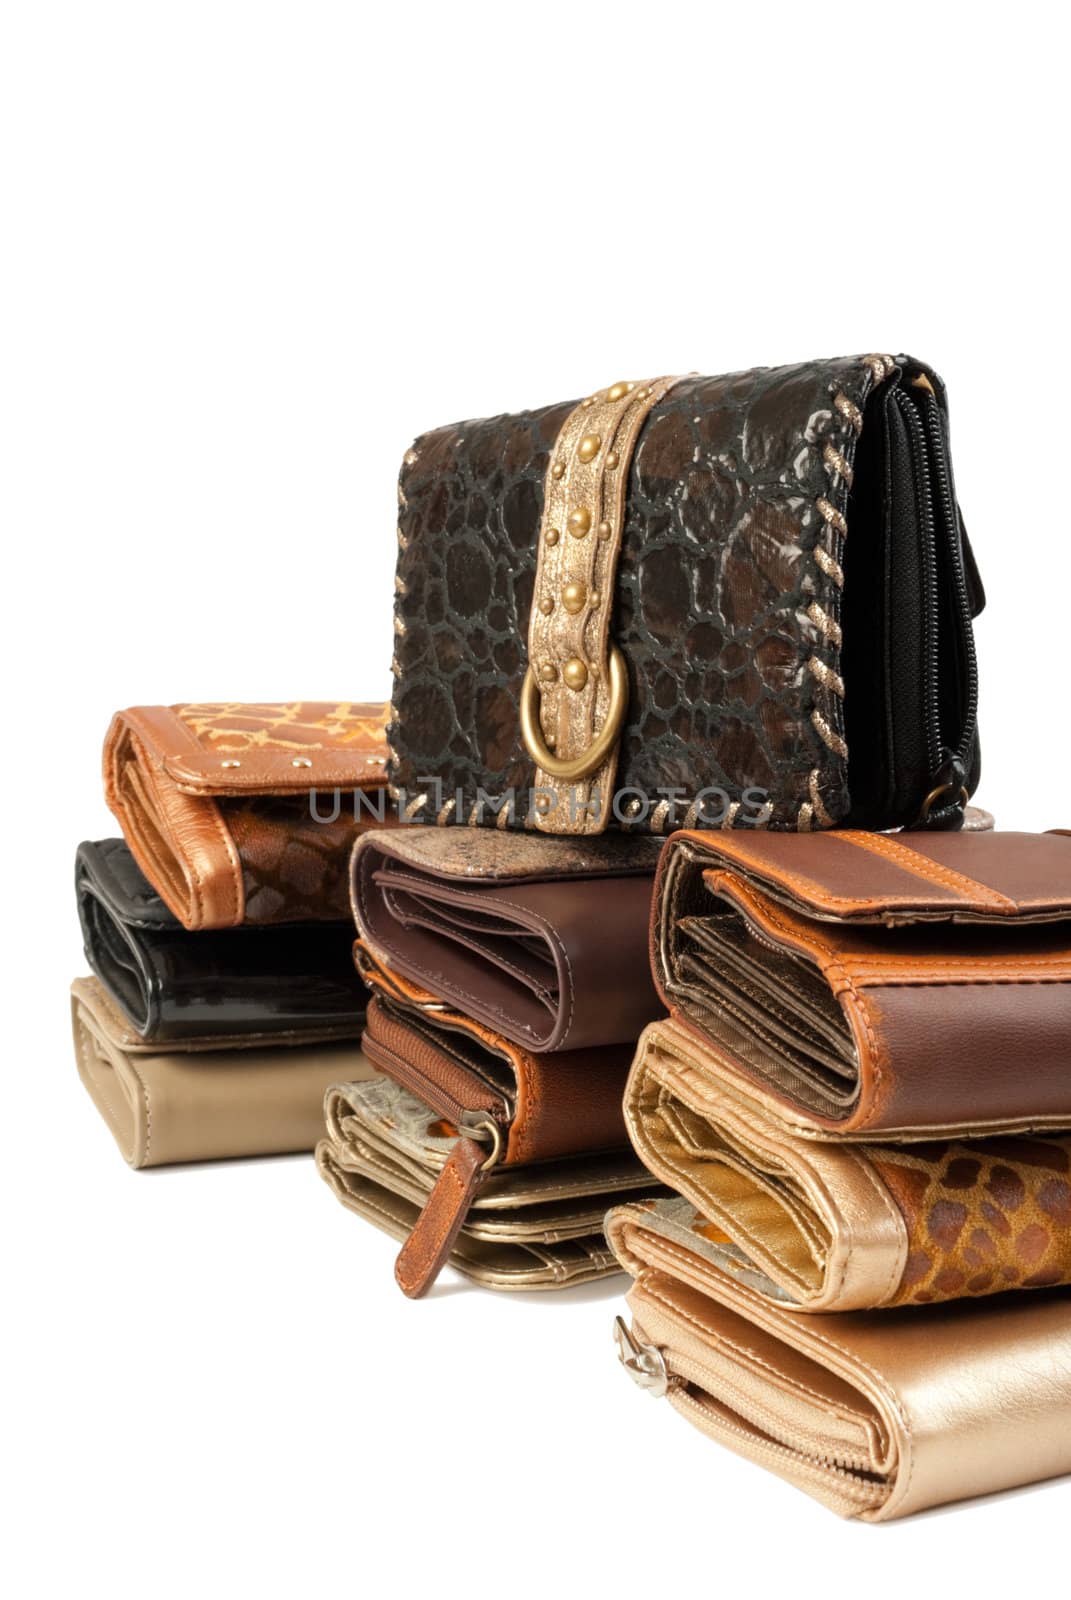 10 leather purses in stack. Isolated on white background